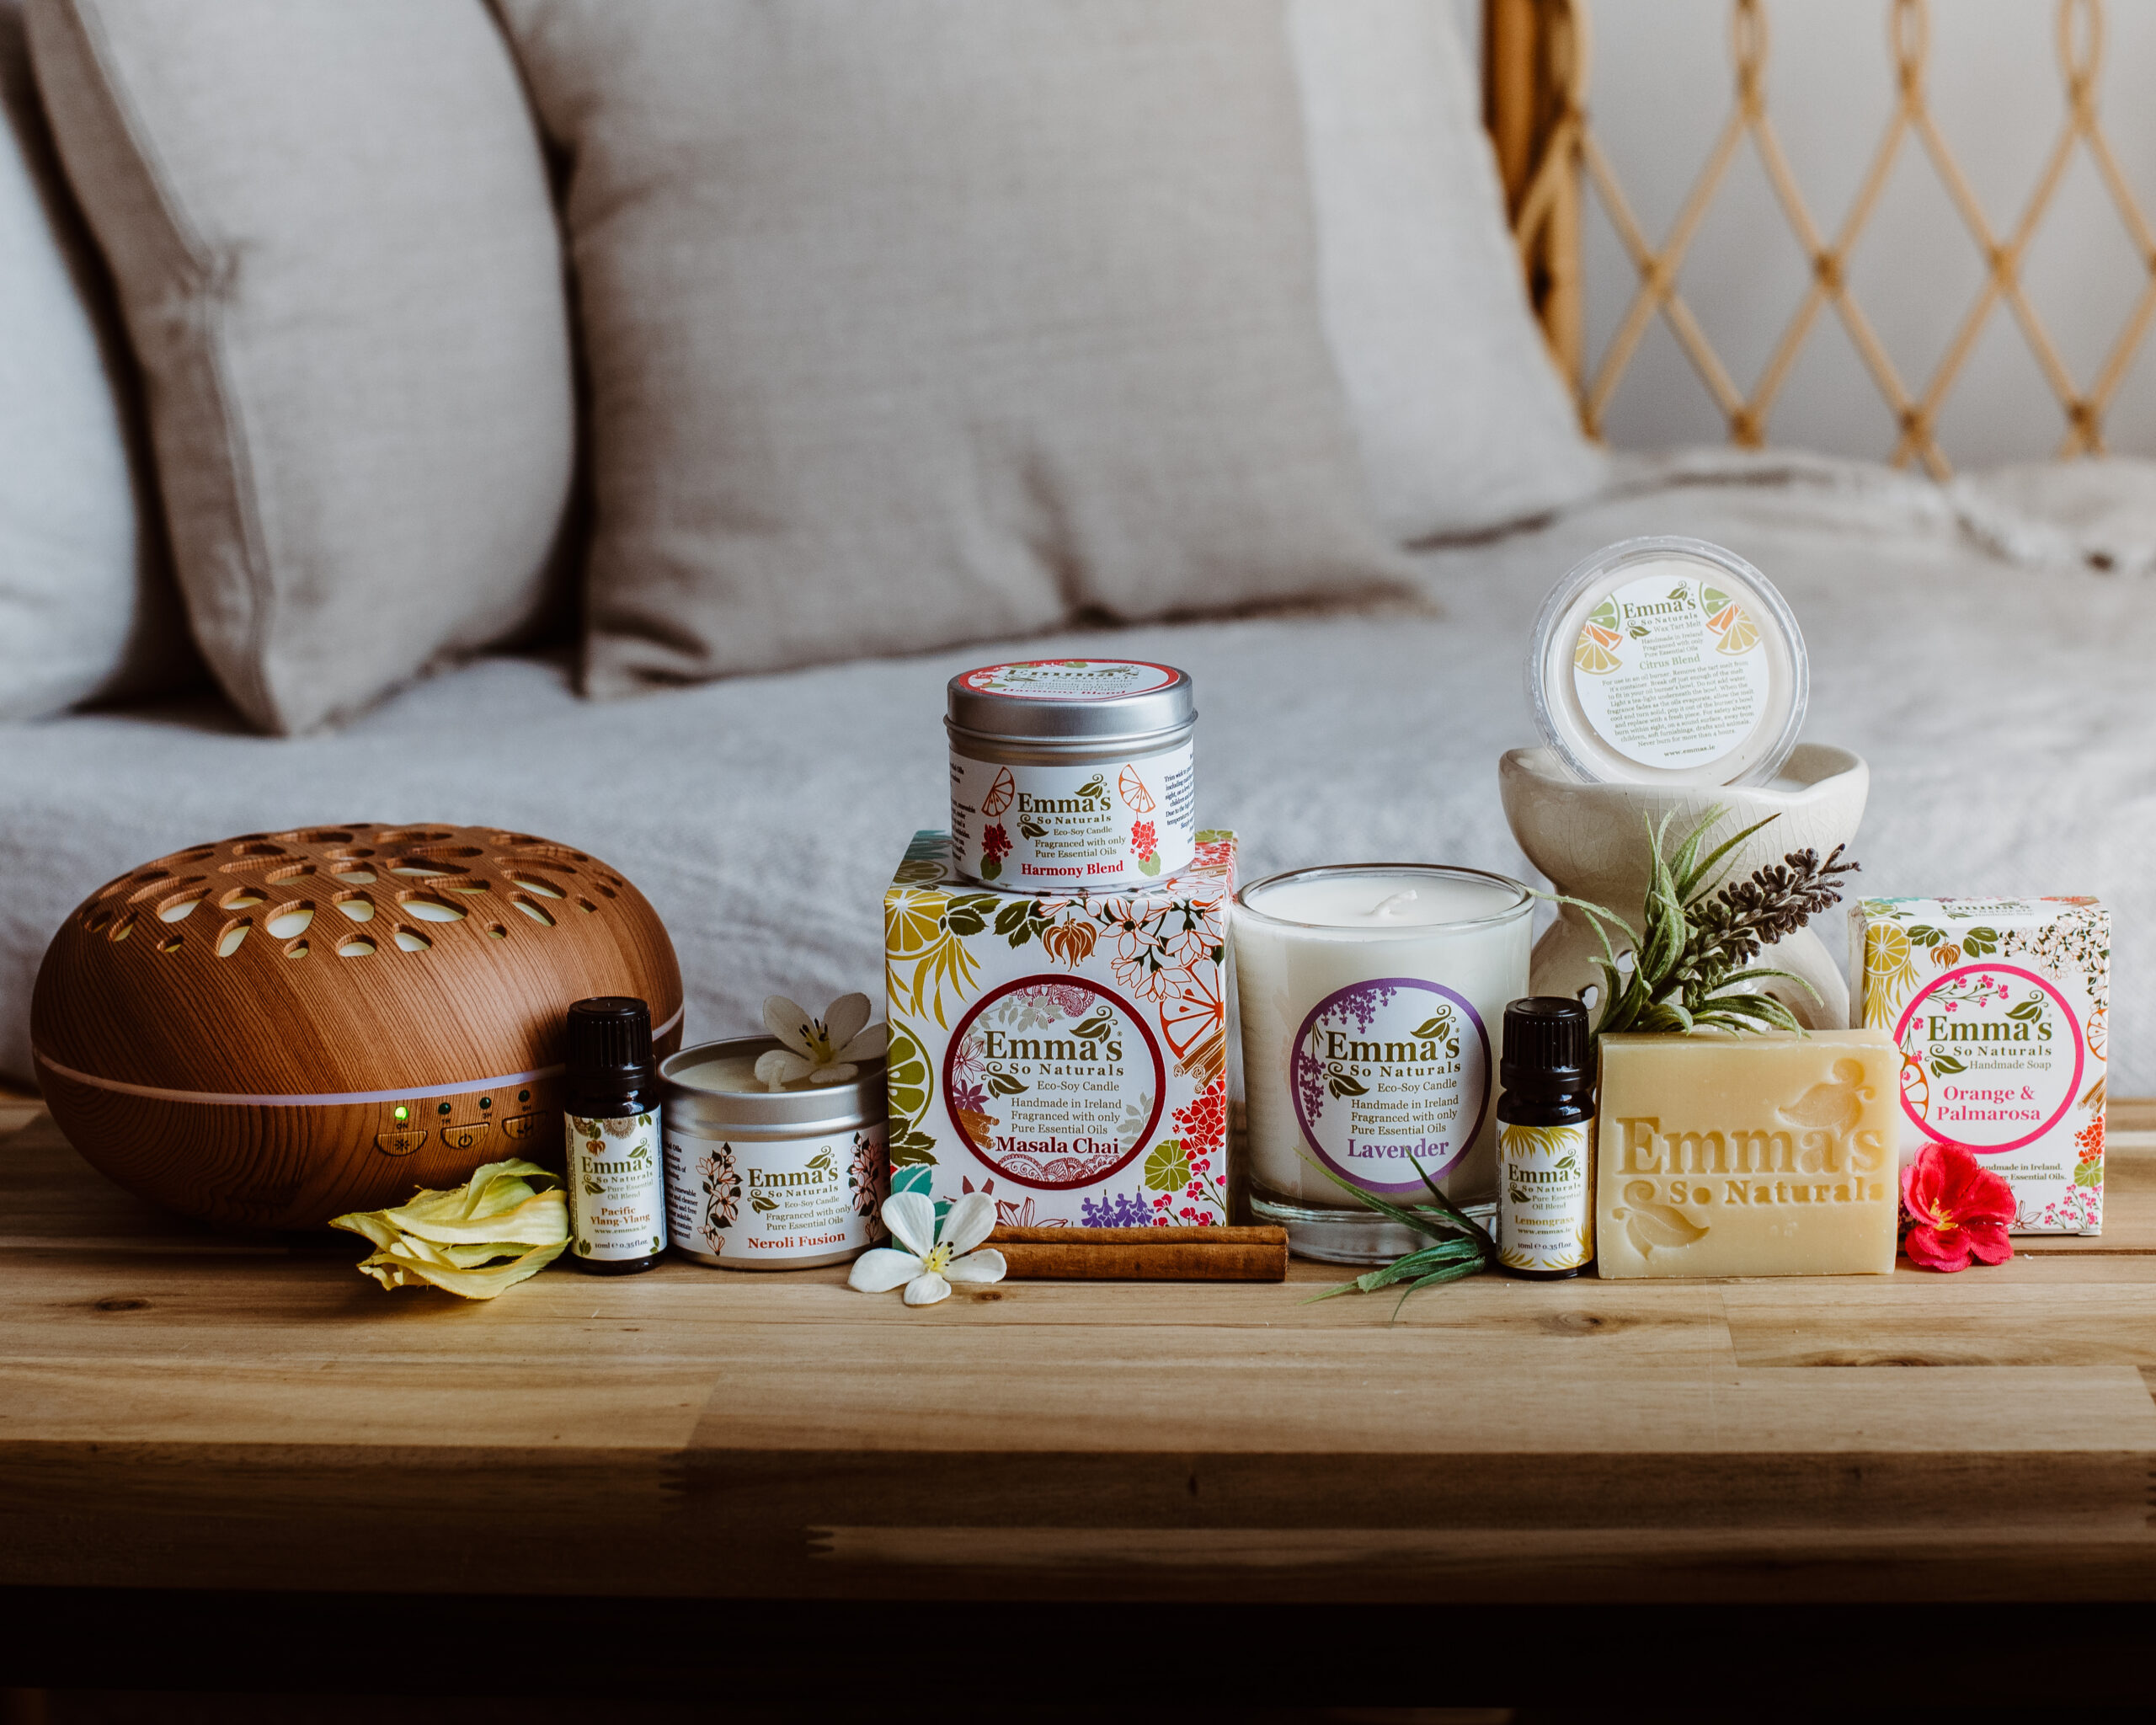 Emma's_So_Naturals_Full_Collection_Soy Candles_Aroma_Diffuser_Oil_ Soap